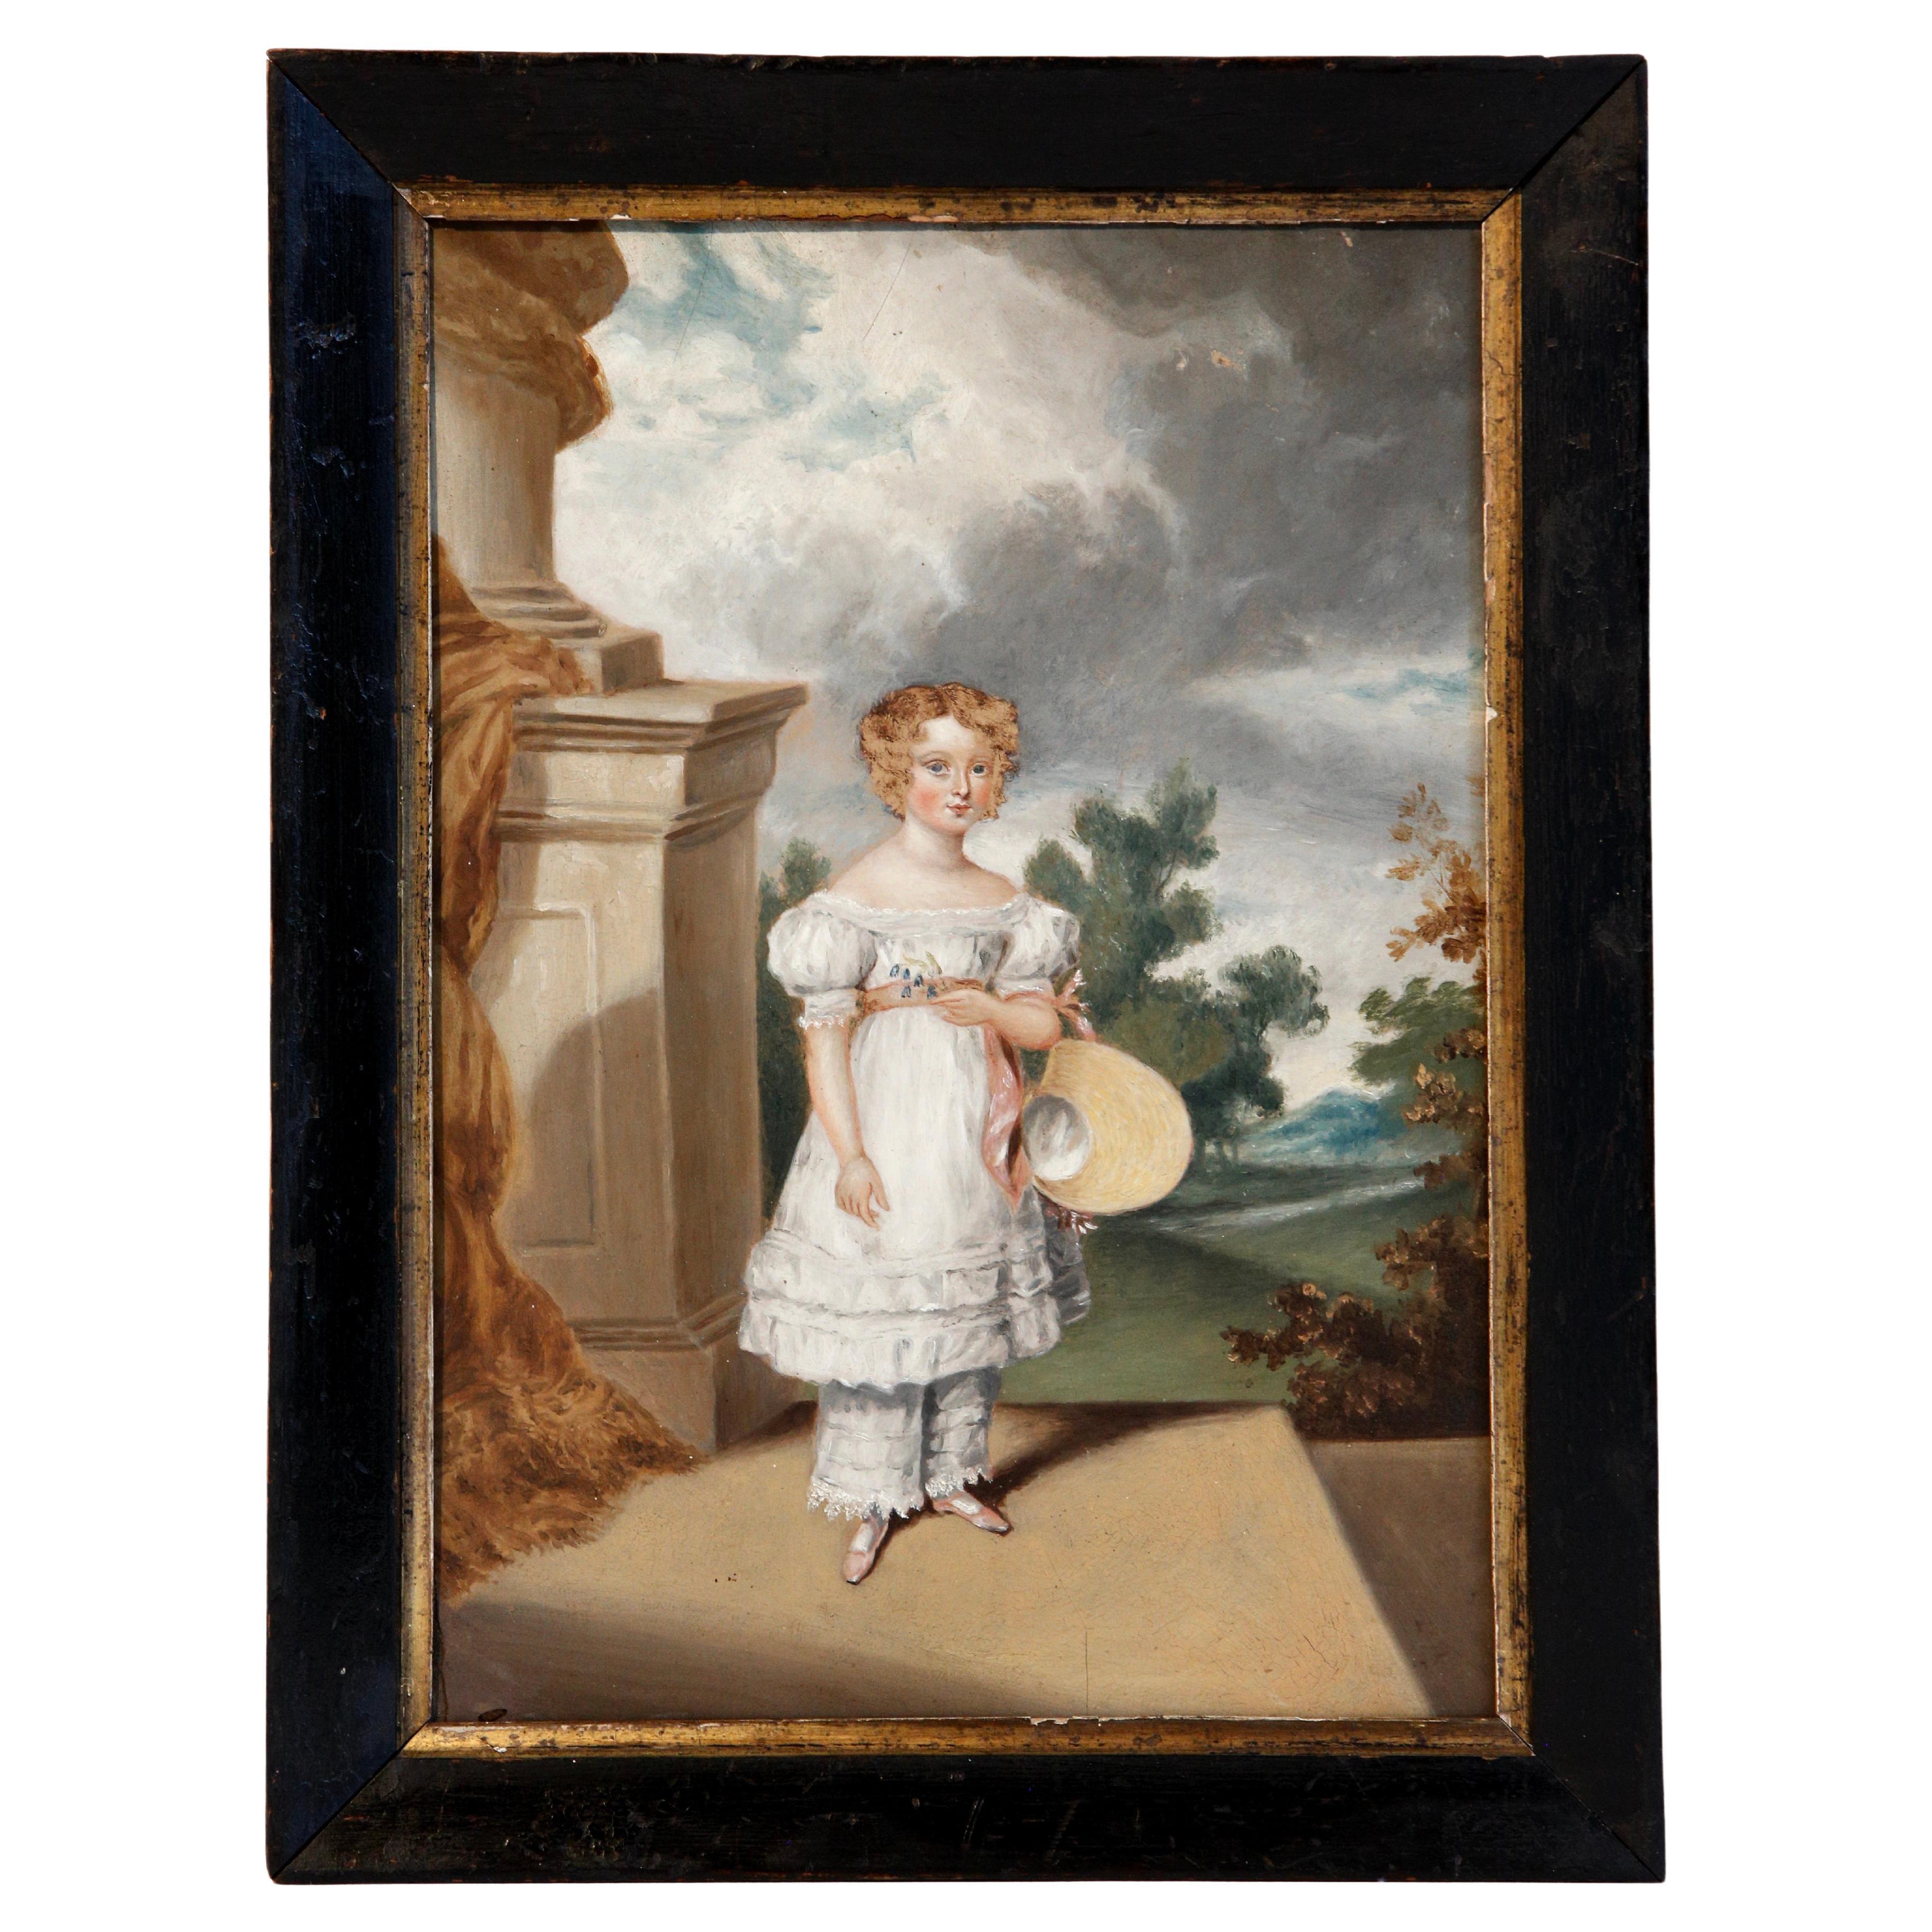 19c Naive Oil Painting of a Young Girl in an Architectural Scene